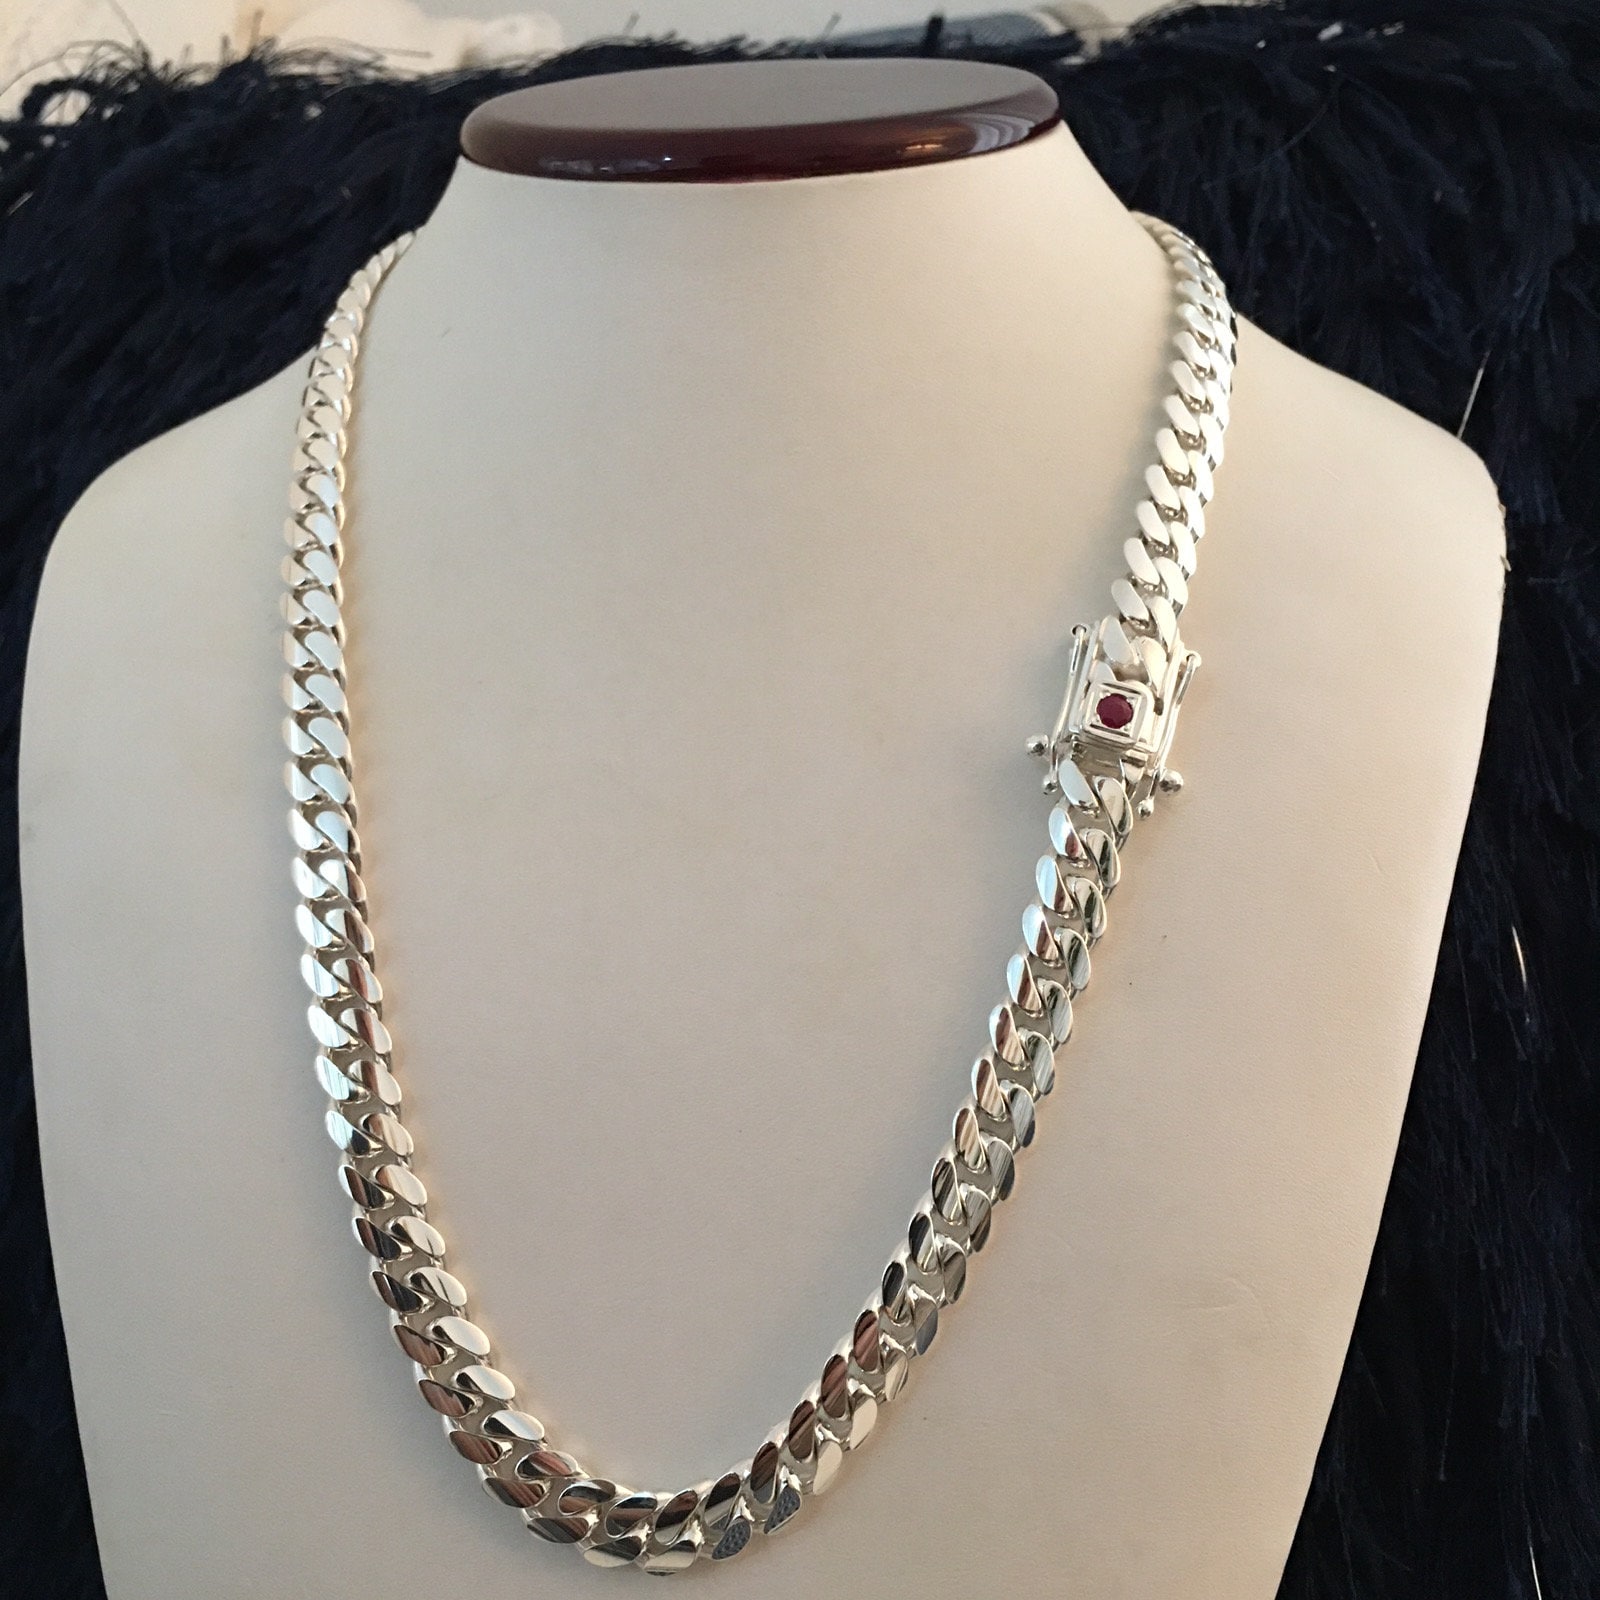 Sterling Silver Cuban Curb Chain Necklace 13.5mm (Gauge 350). Available in 4 Lengths.